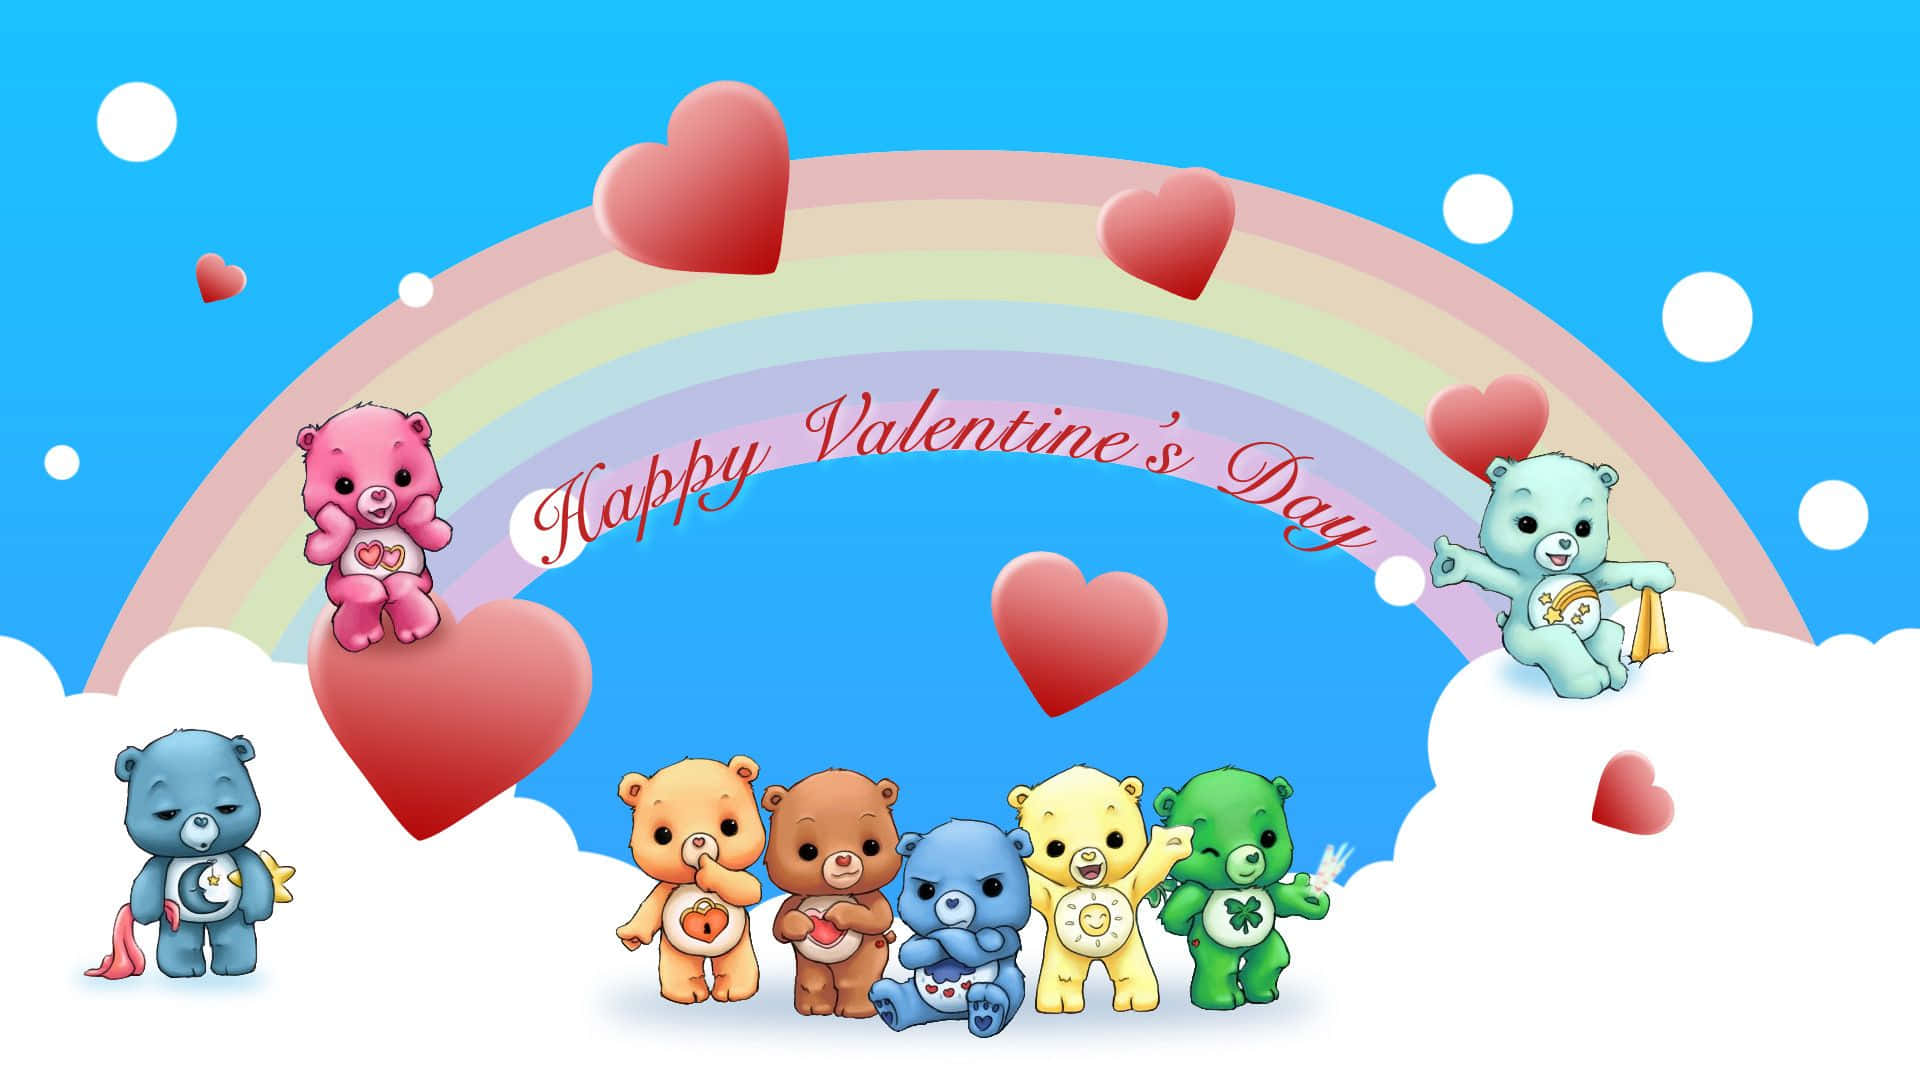 Celebrate love this Valentine's Day with a super cute gift!